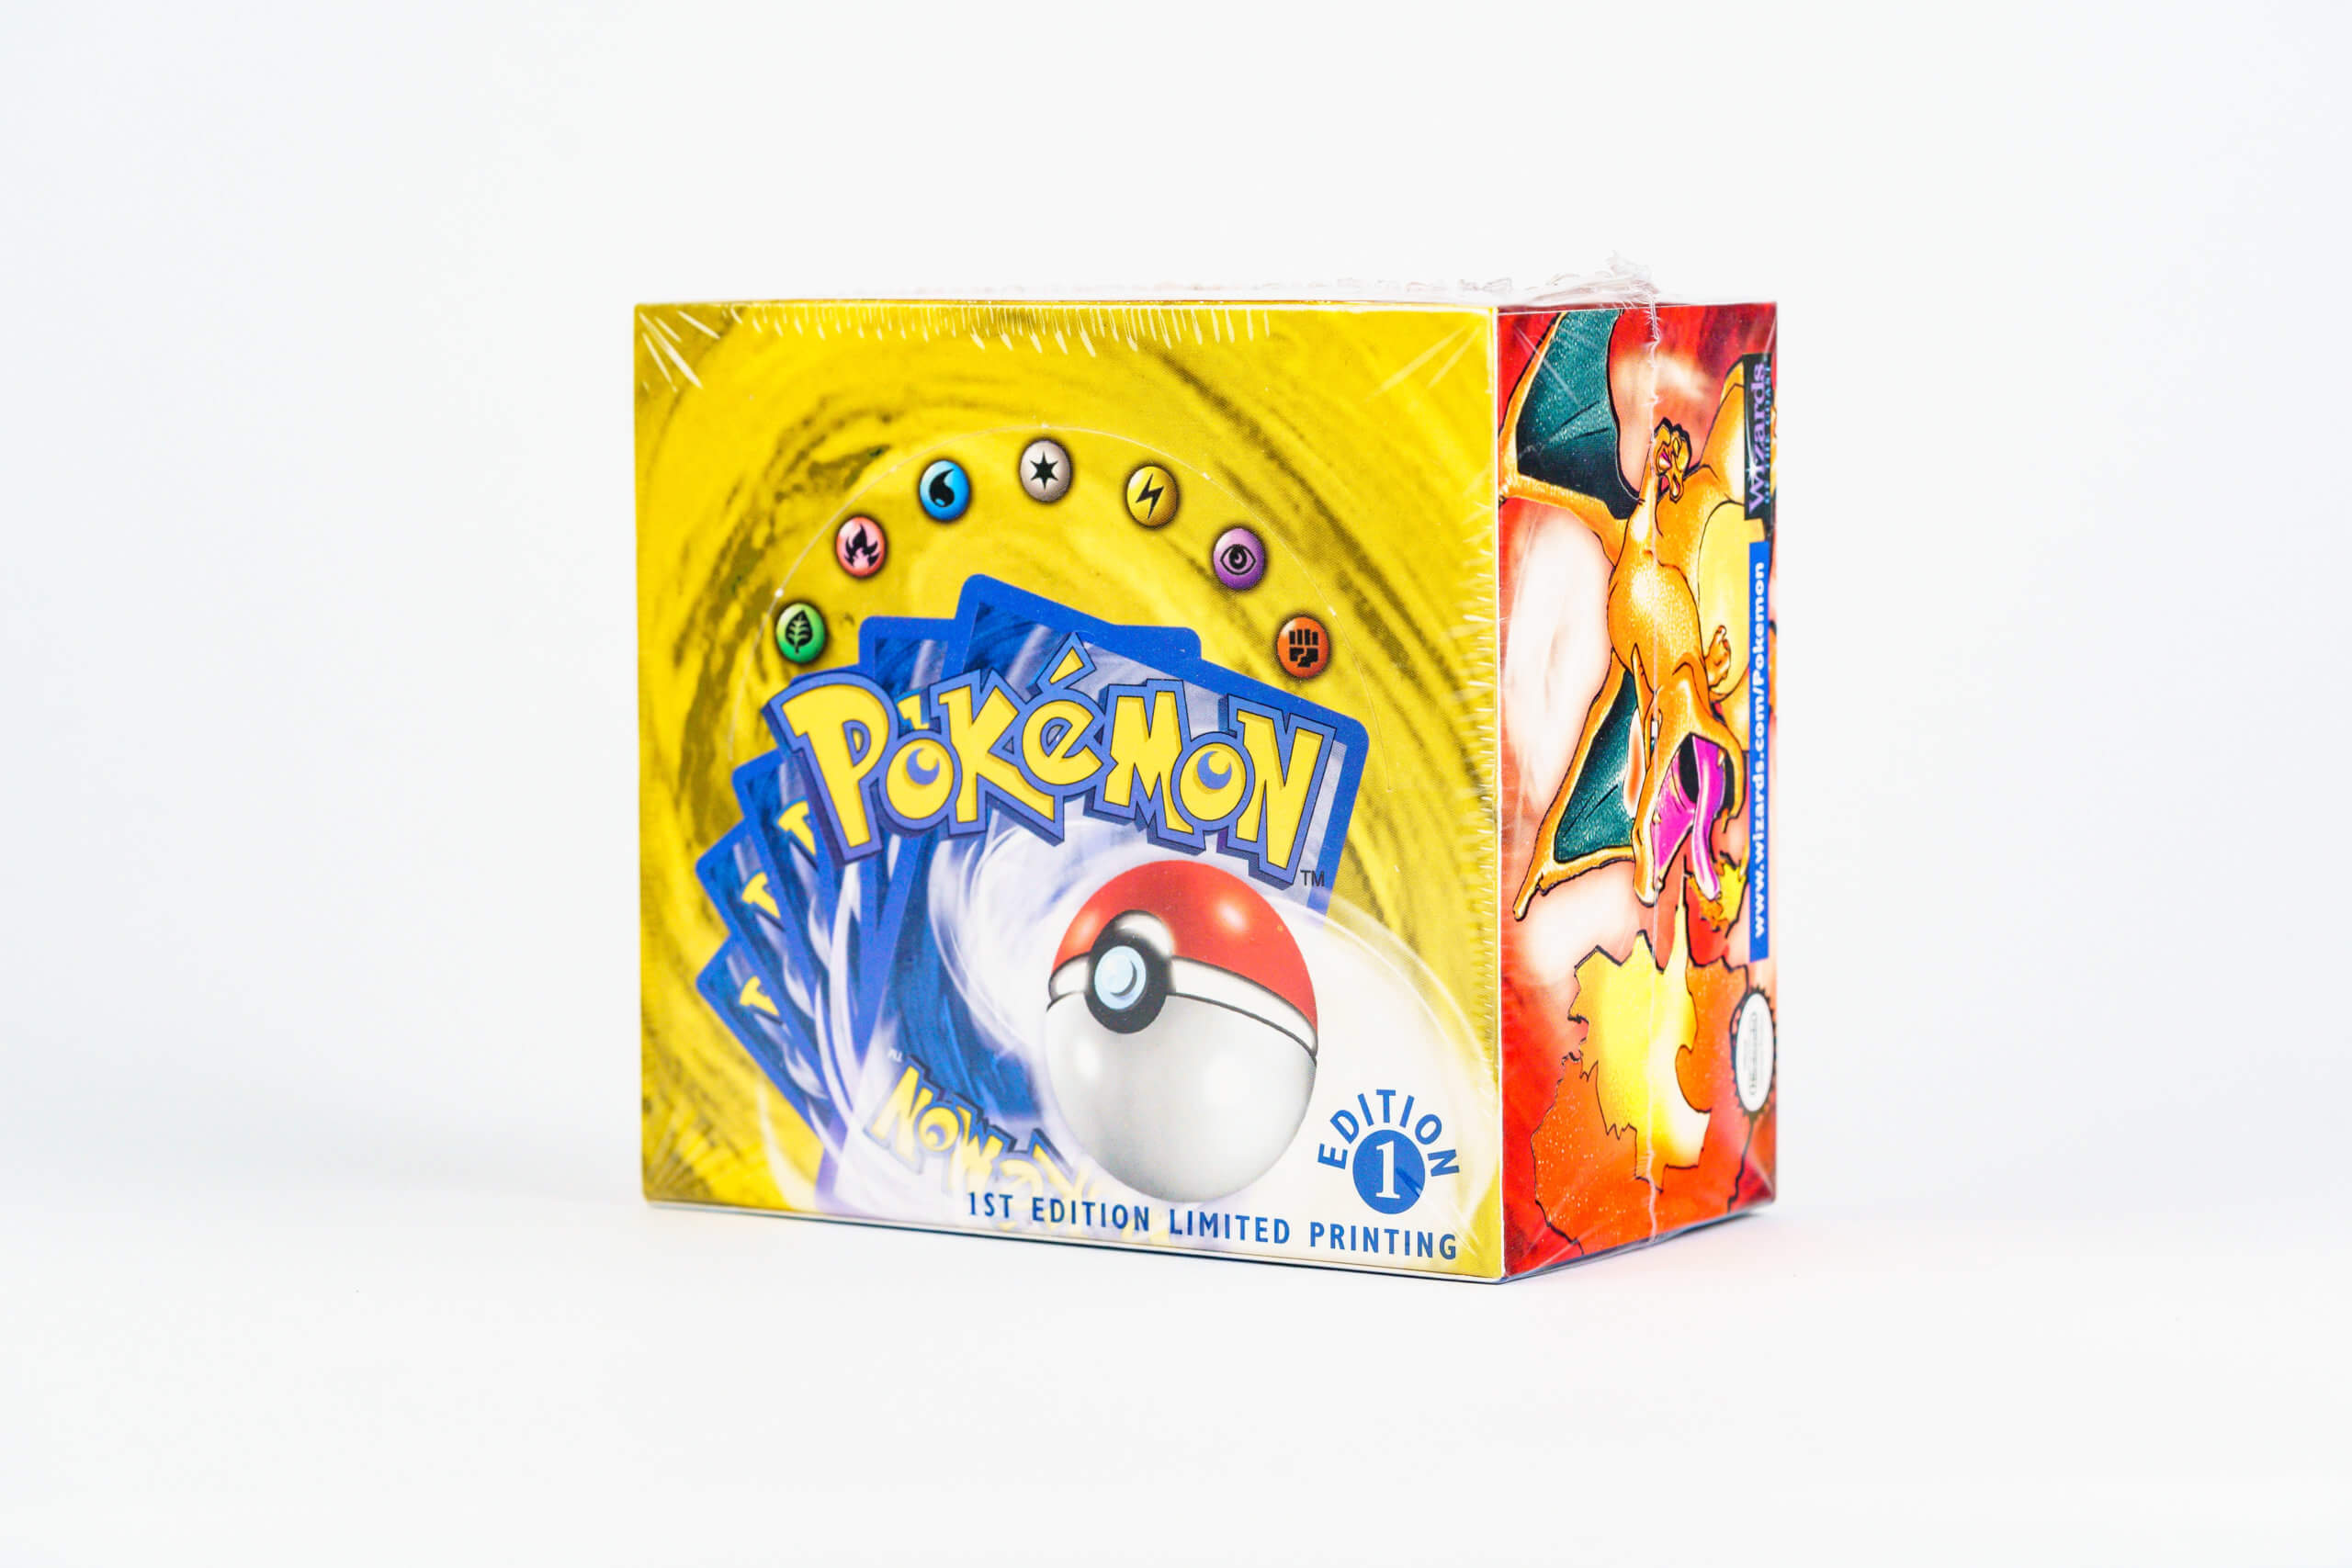 Pokemon 1st Edition Limited Printing box of booster packs